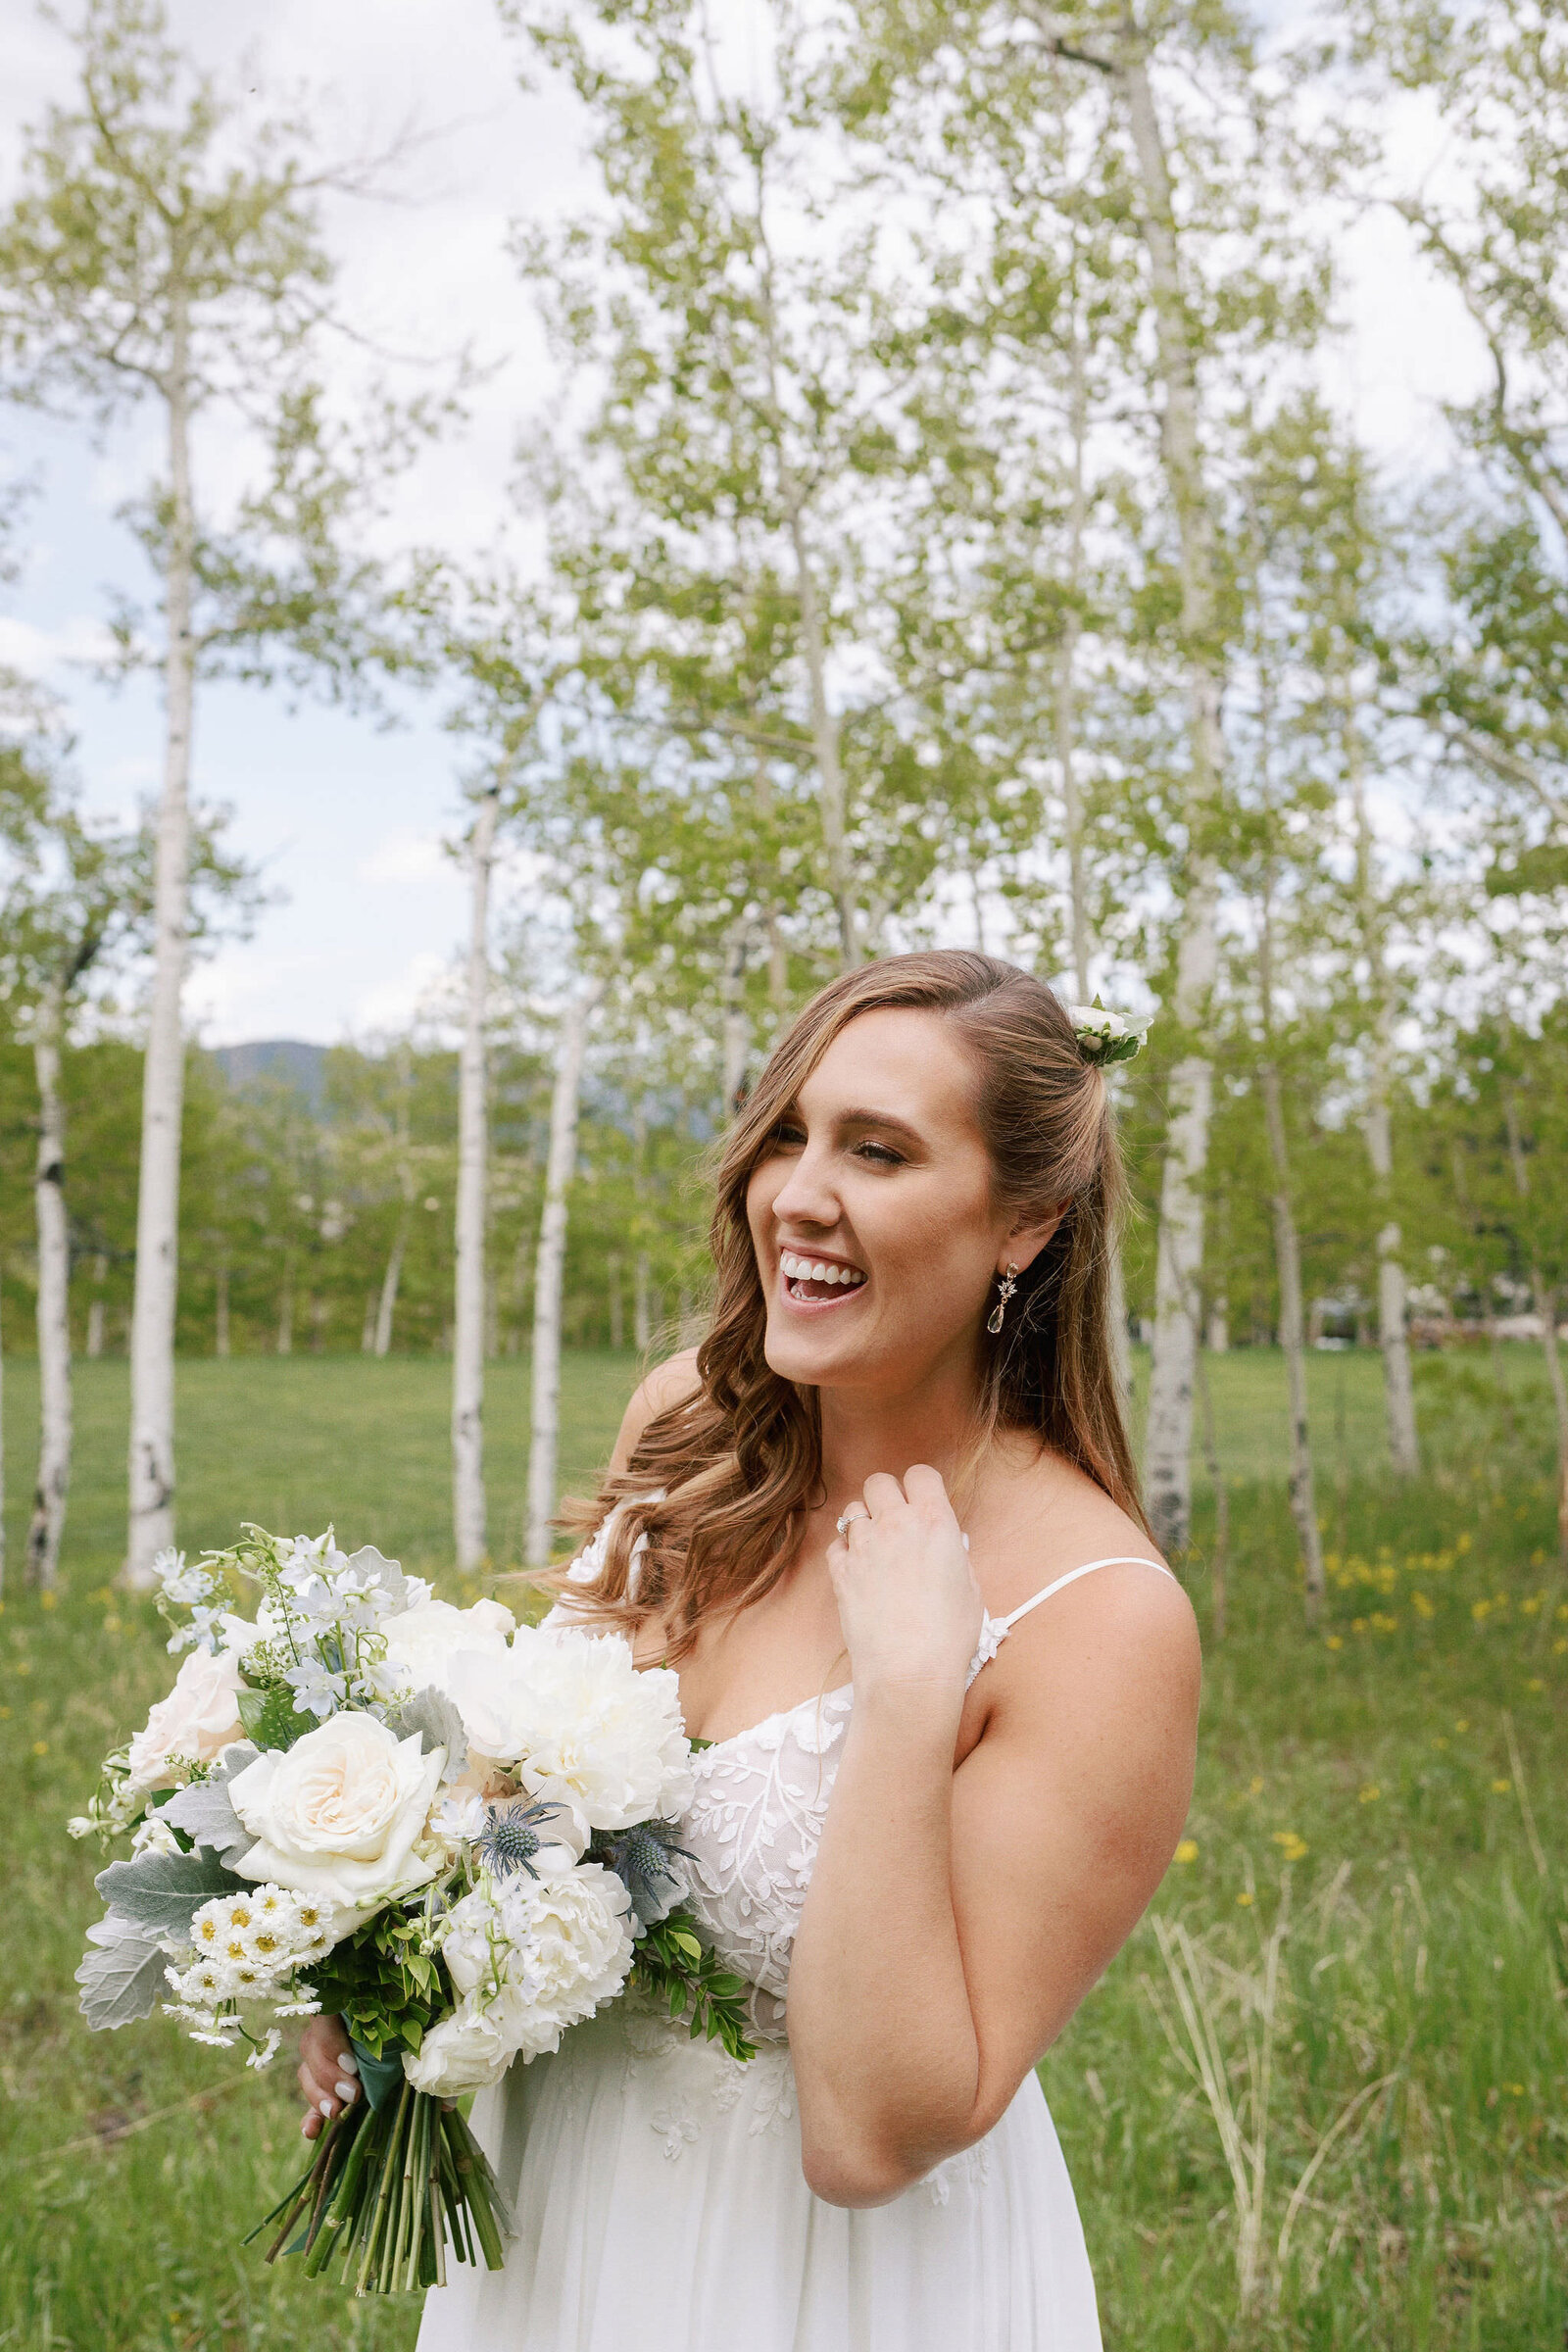 A bride laughing while holding a bouquet of flowers.